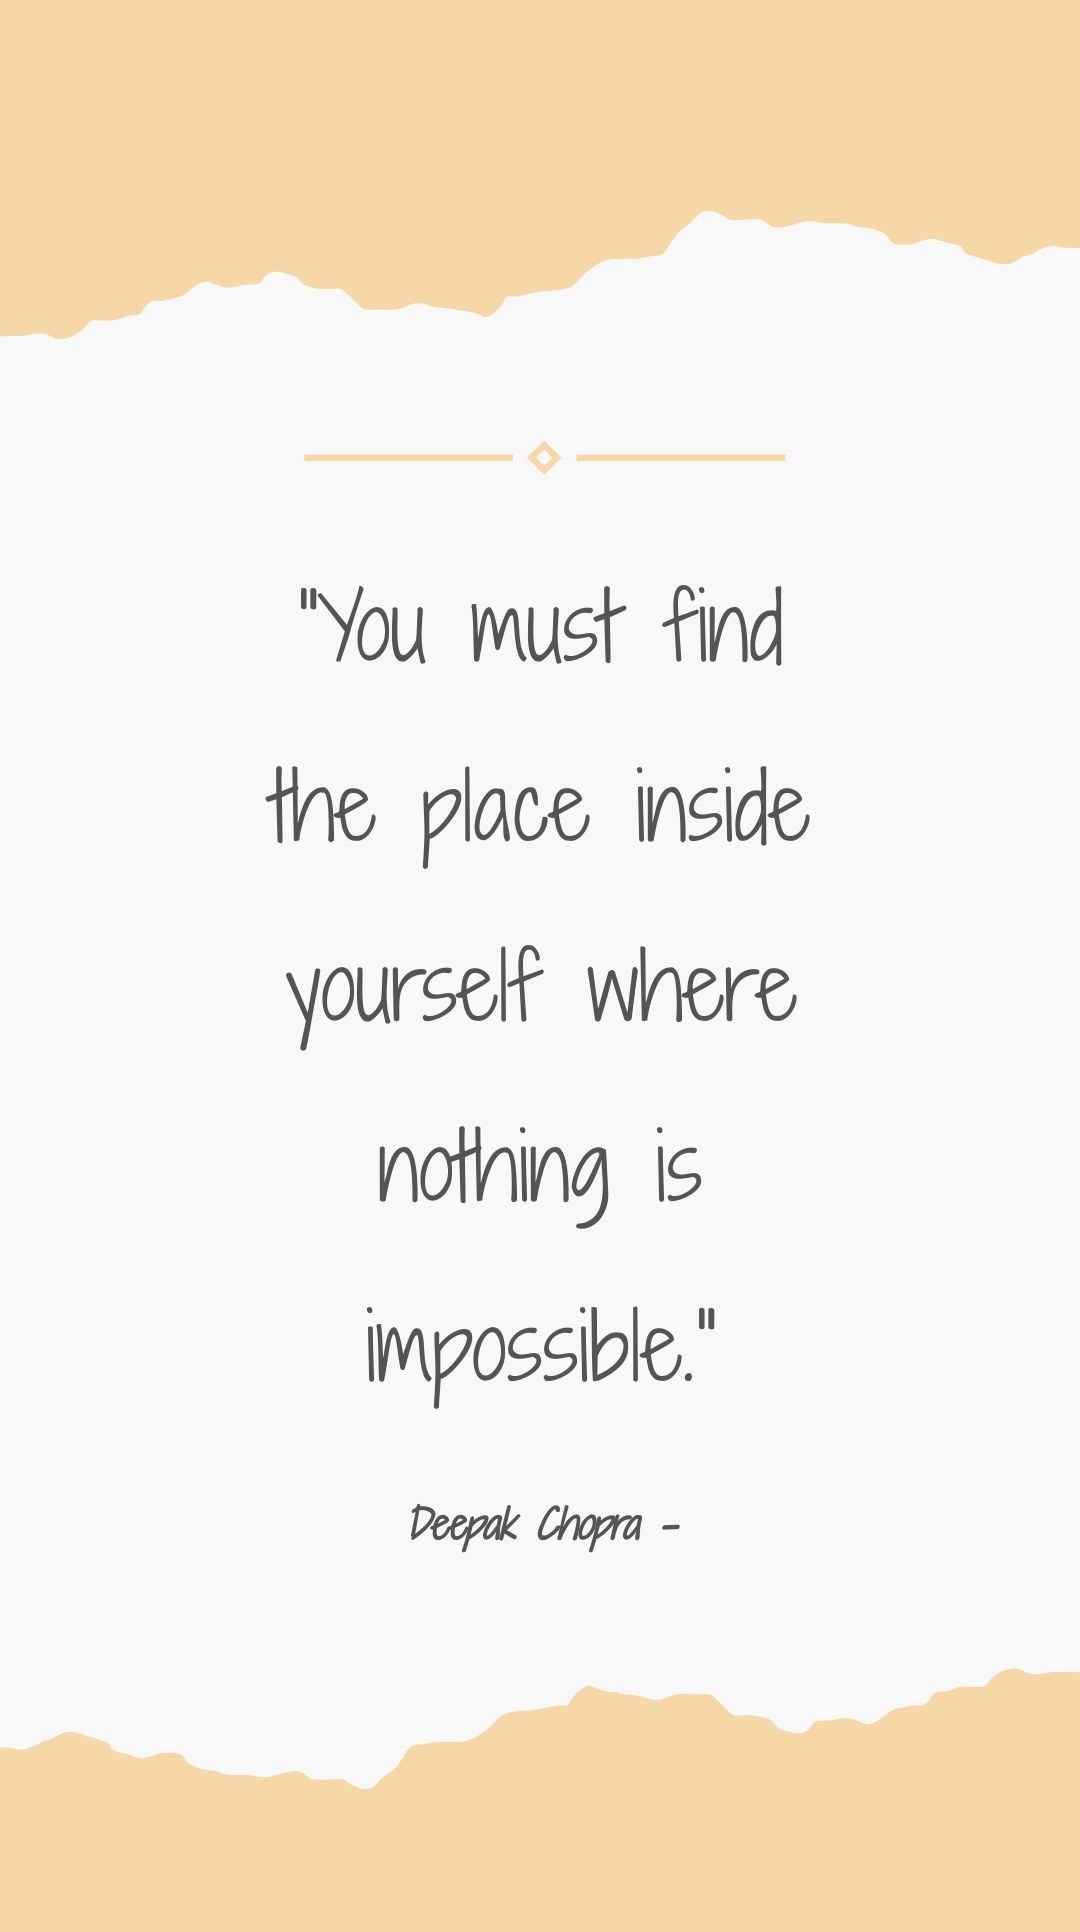 Deepak Chopra - You must find the place inside yourself where nothing is impossible.